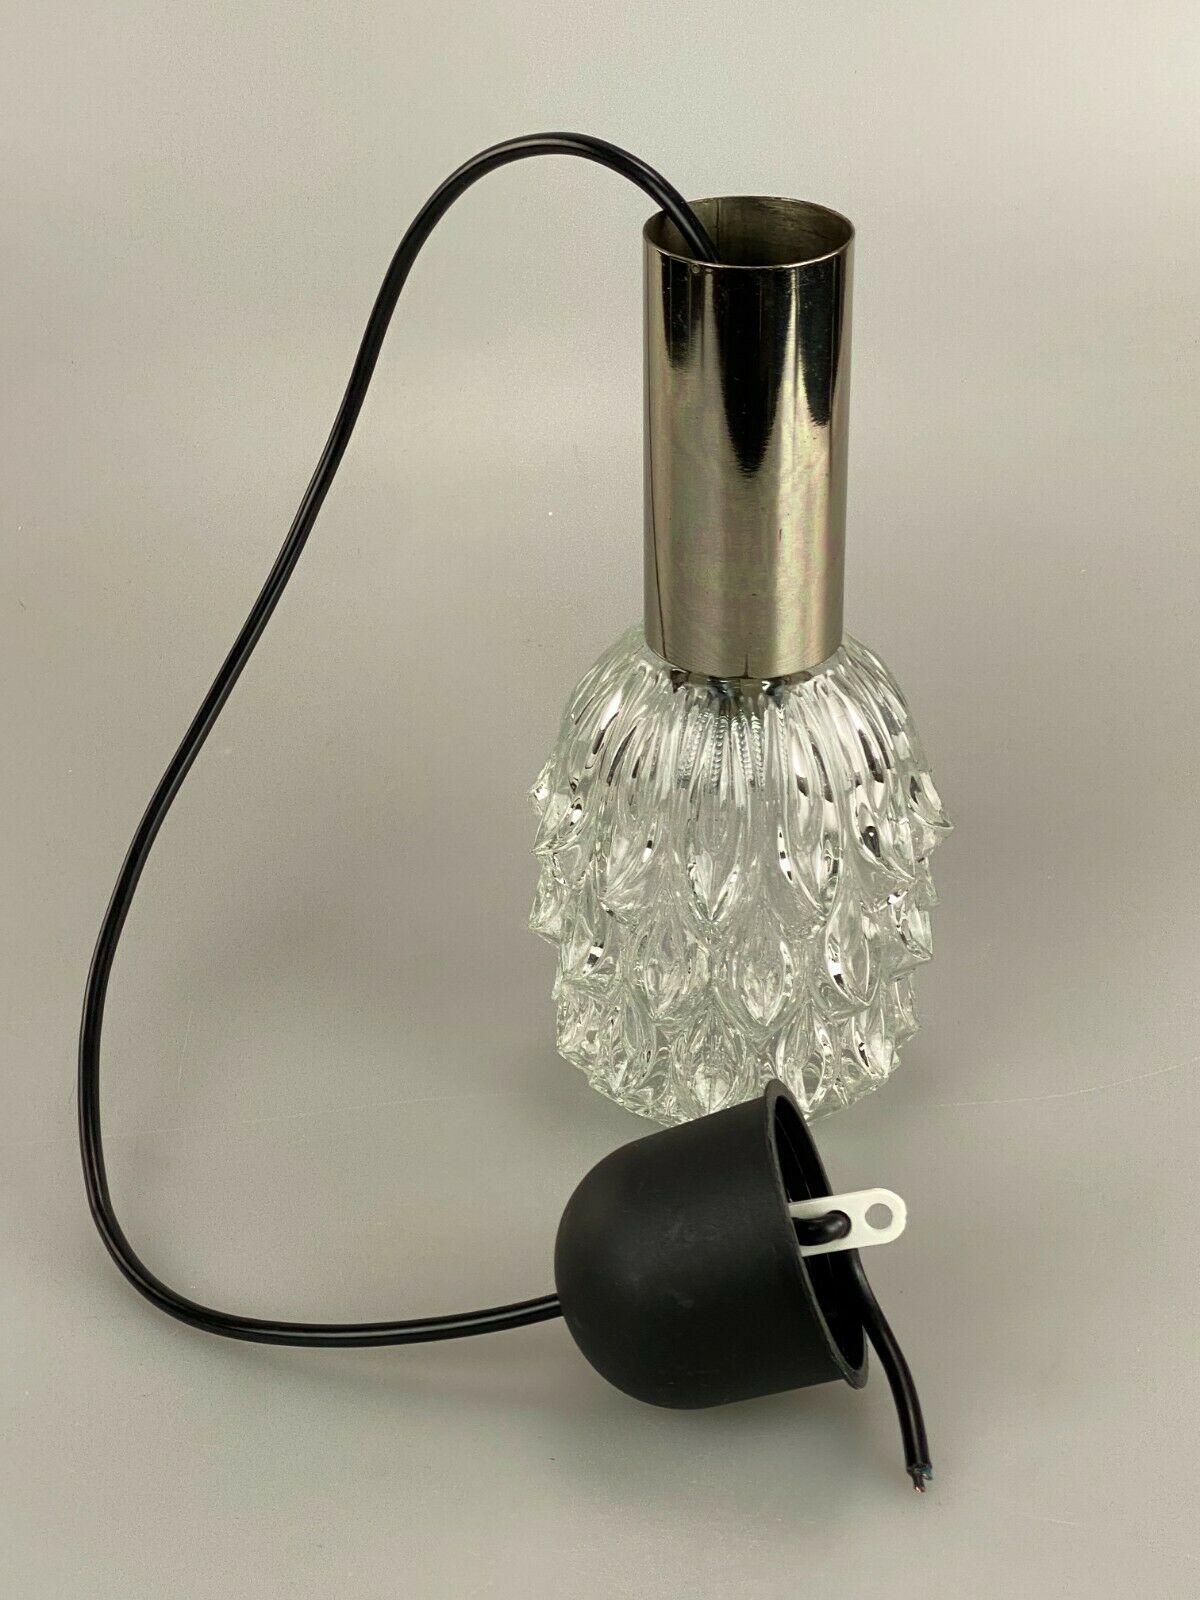 60s 70s Lamp Hanging Lamp Ball Lamp Bubble Chrome Glass Space Age Design For Sale 2